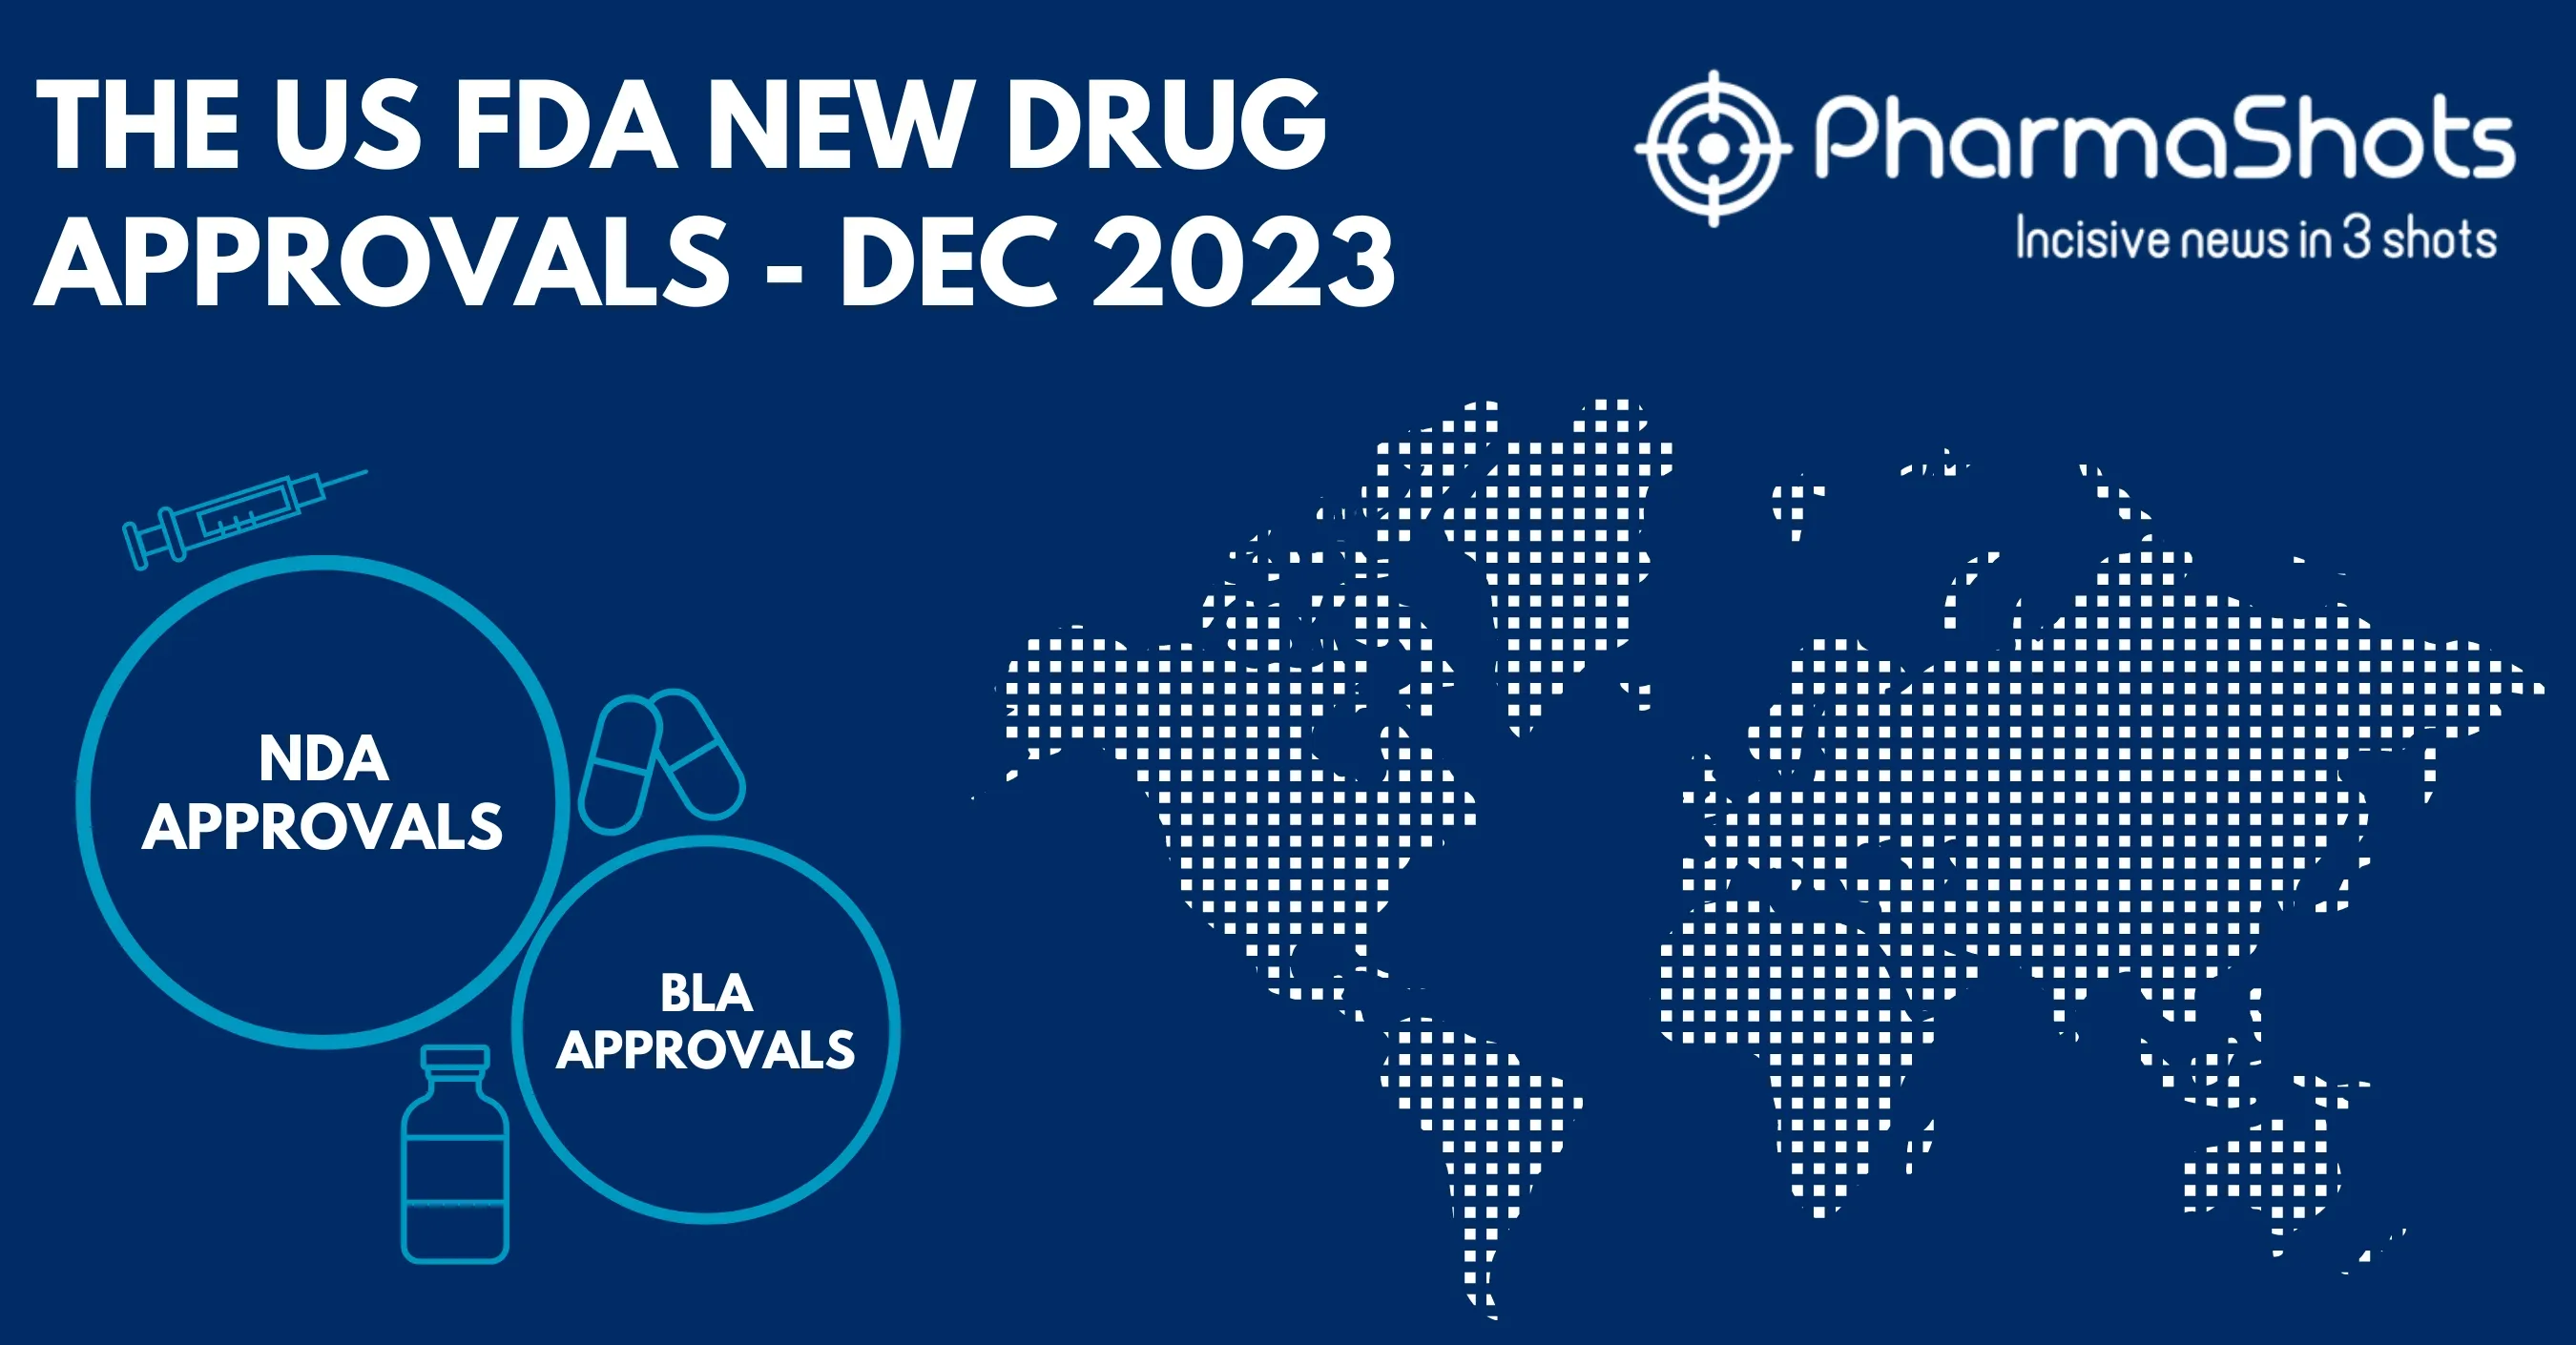 Insights+: The US FDA New Drug Approvals in December 2023 